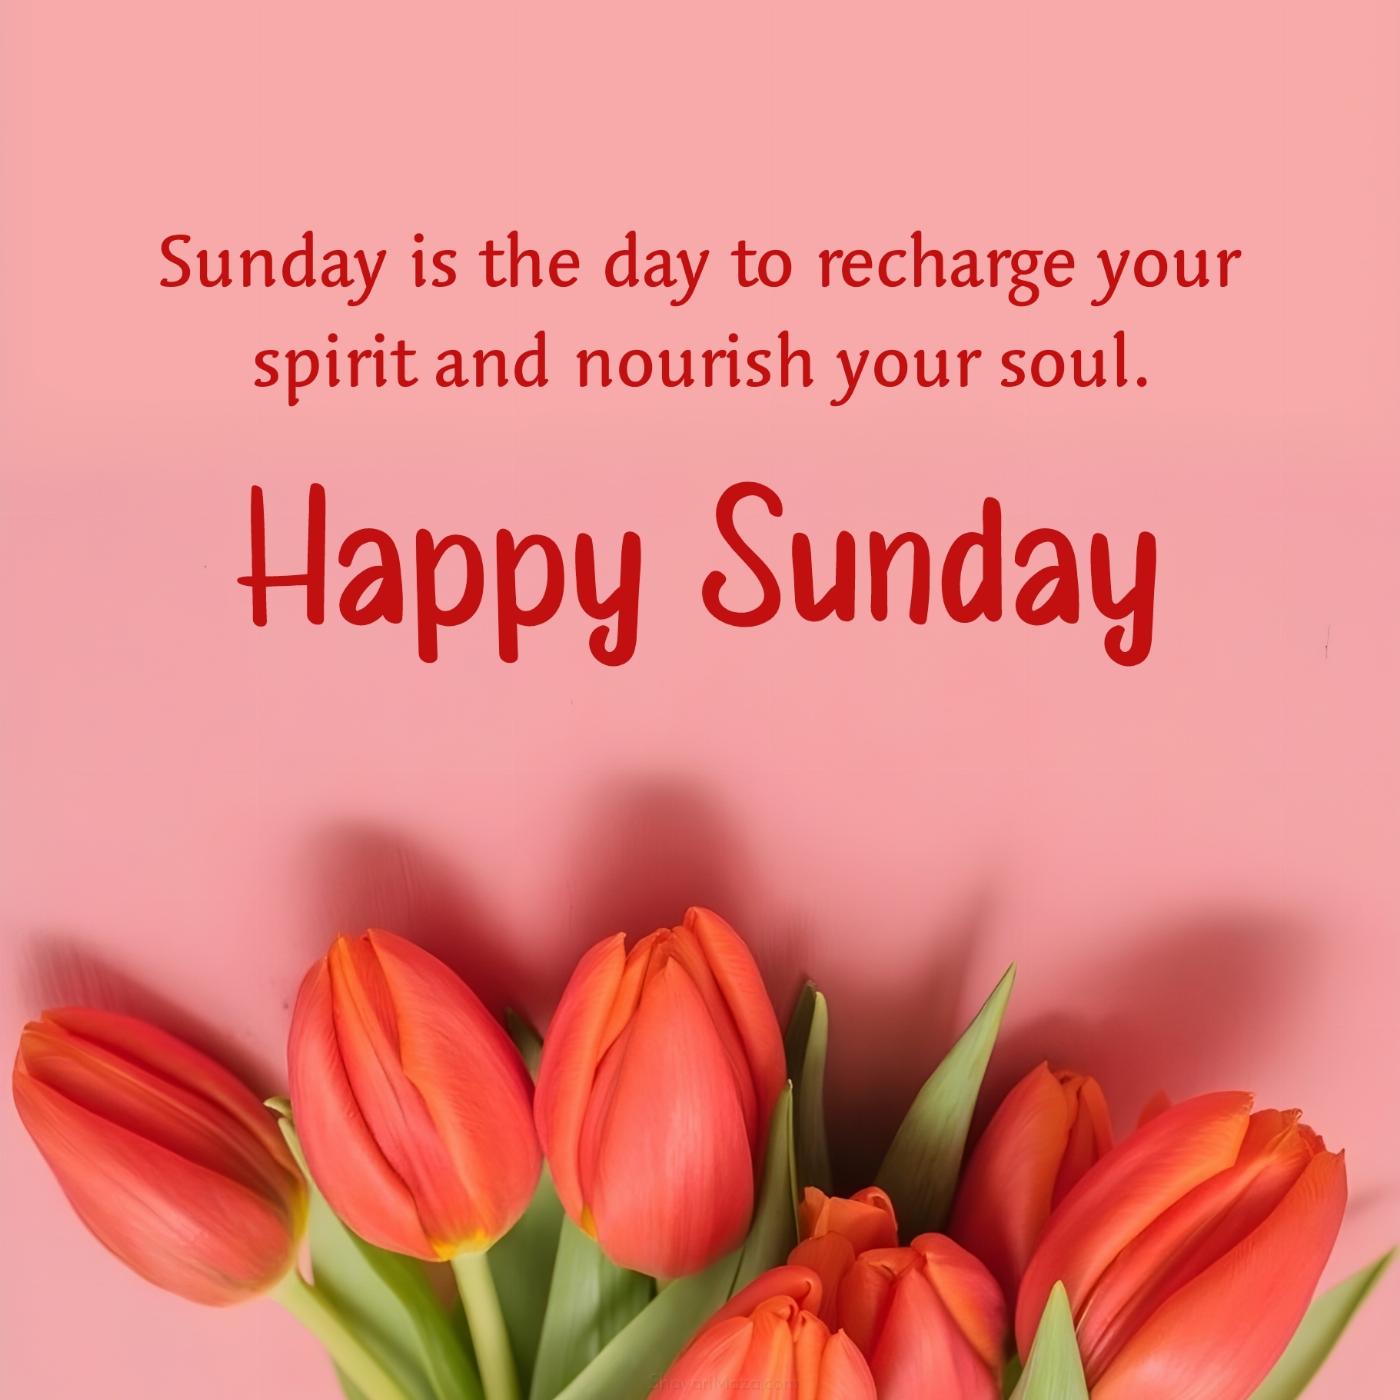 Sunday is the day to recharge your spirit and nourish your soul